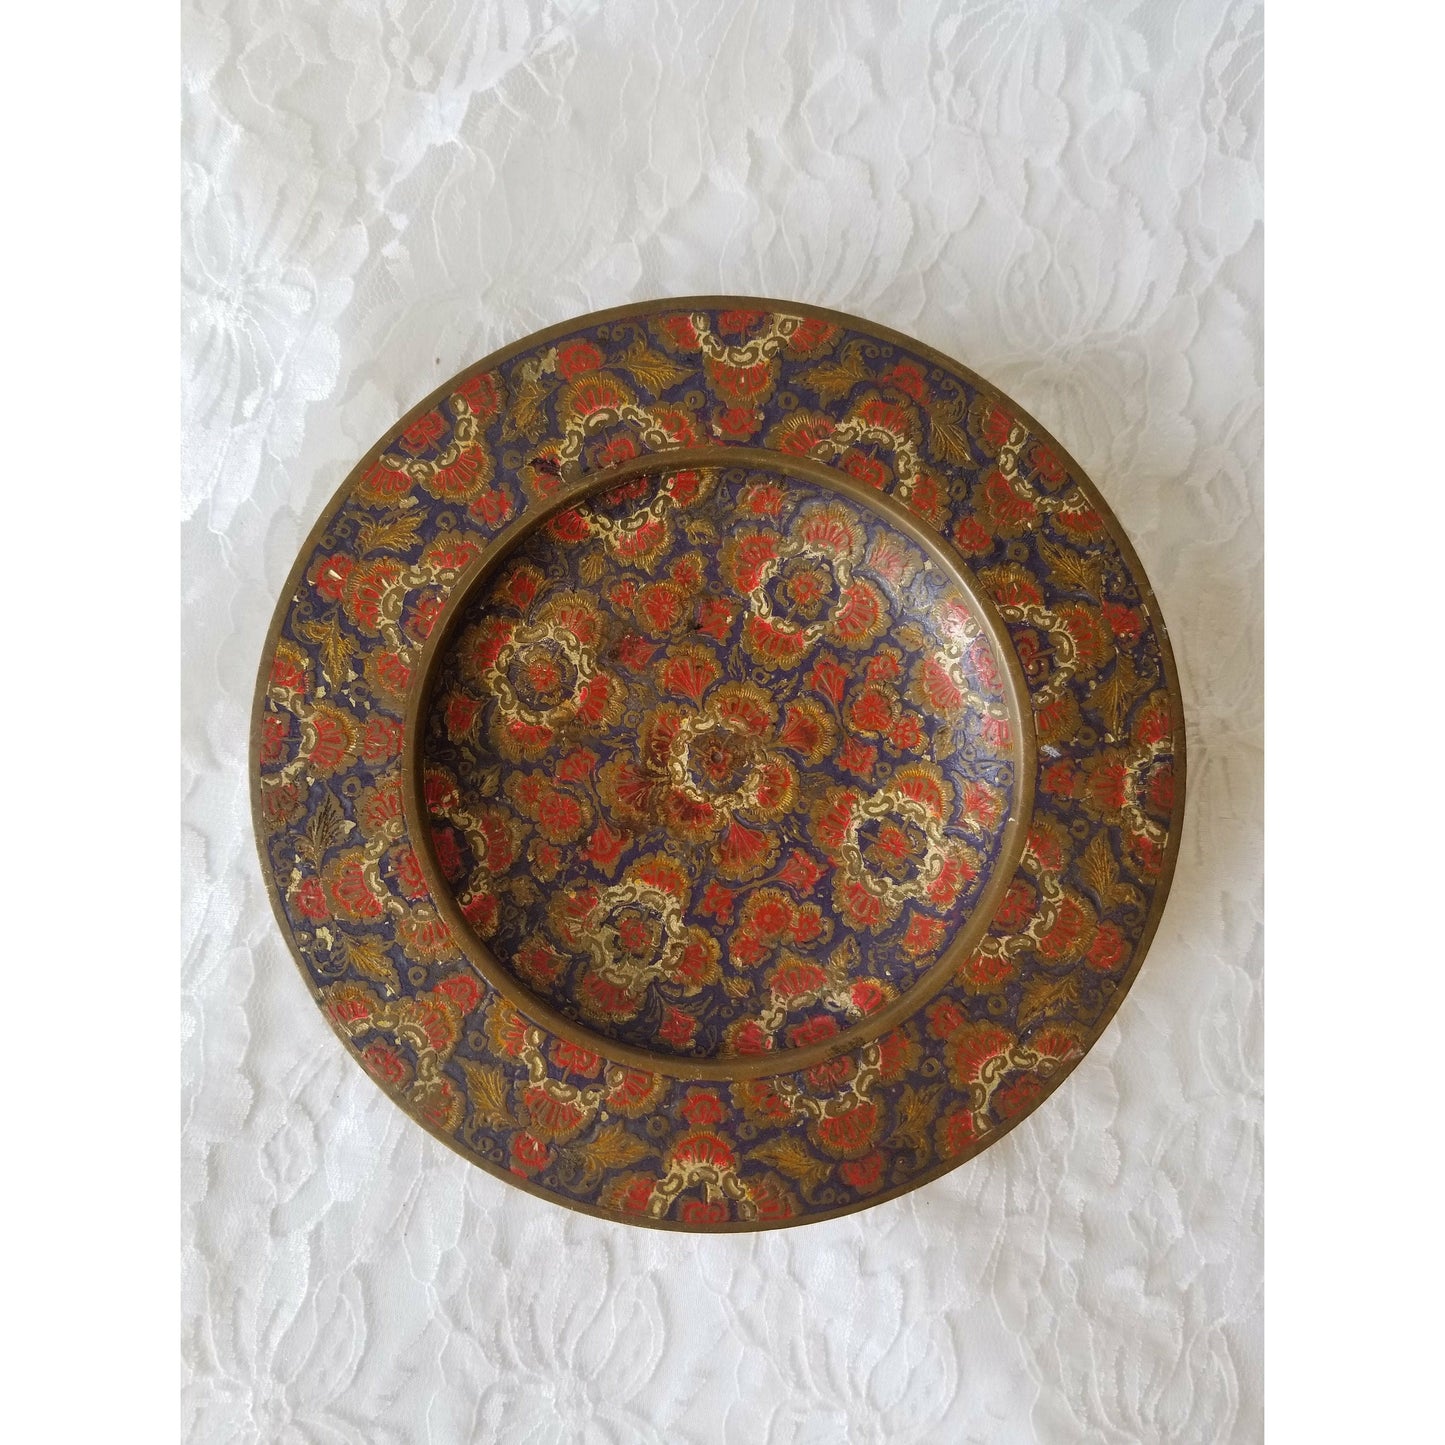 Pedestal Plate Tray Antique Brass Enamel ~ For Altar or Crystal Display ~ 7" wide 1.25" Tall ~ Perfect for Candies, Serving, or Display